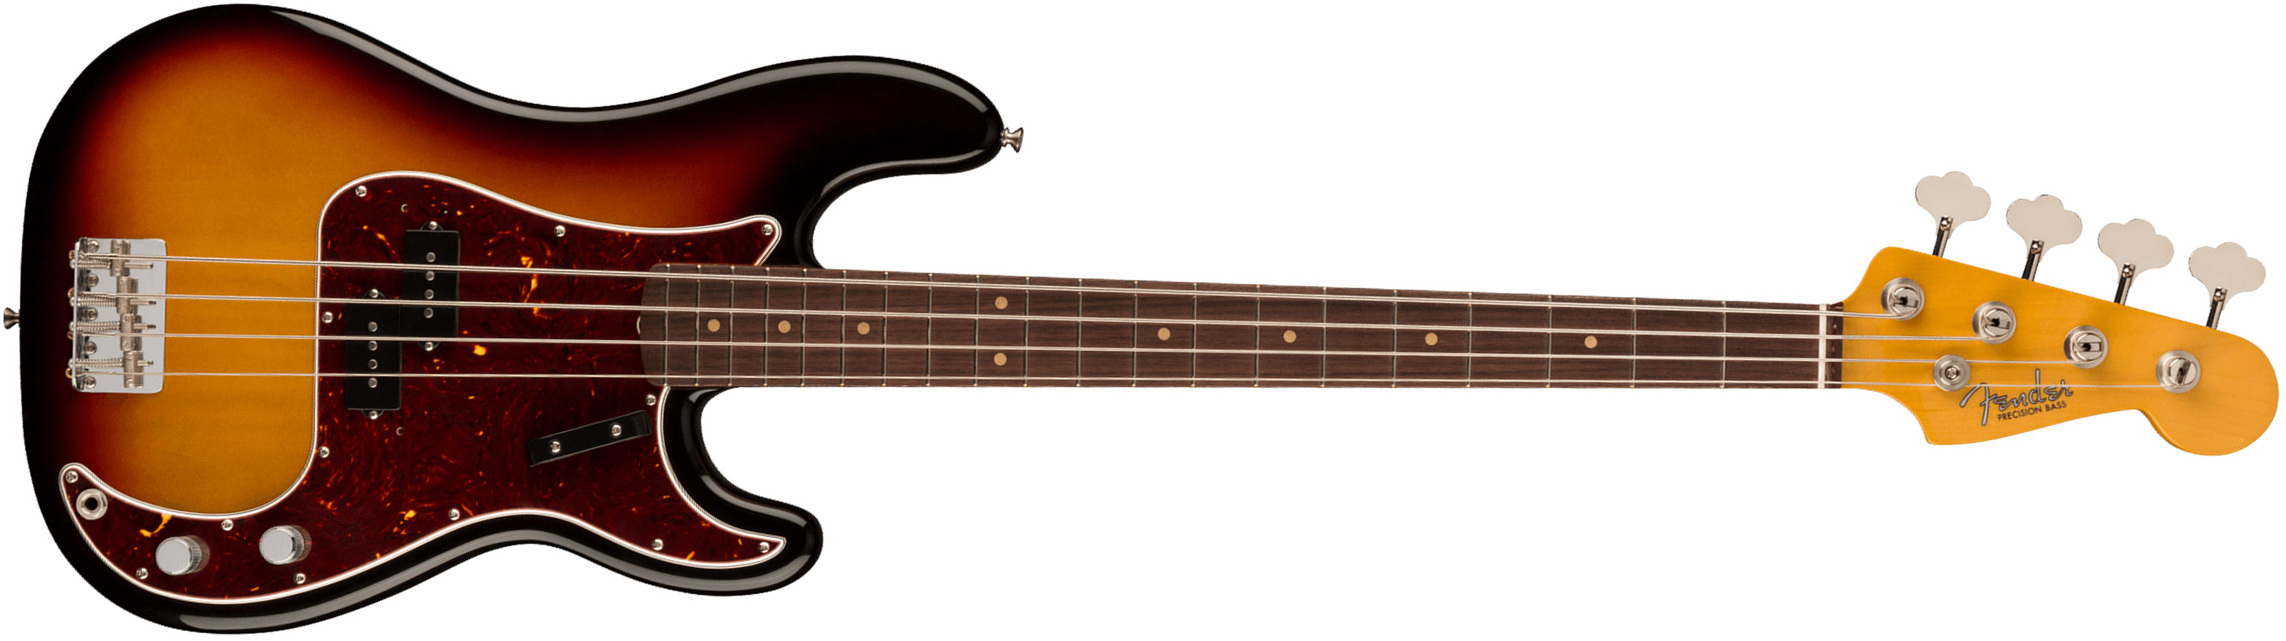 Fender Precision Bass 1960 American Vintage Ii Usa Rw - 3-color Sunburst - Solid body electric bass - Main picture